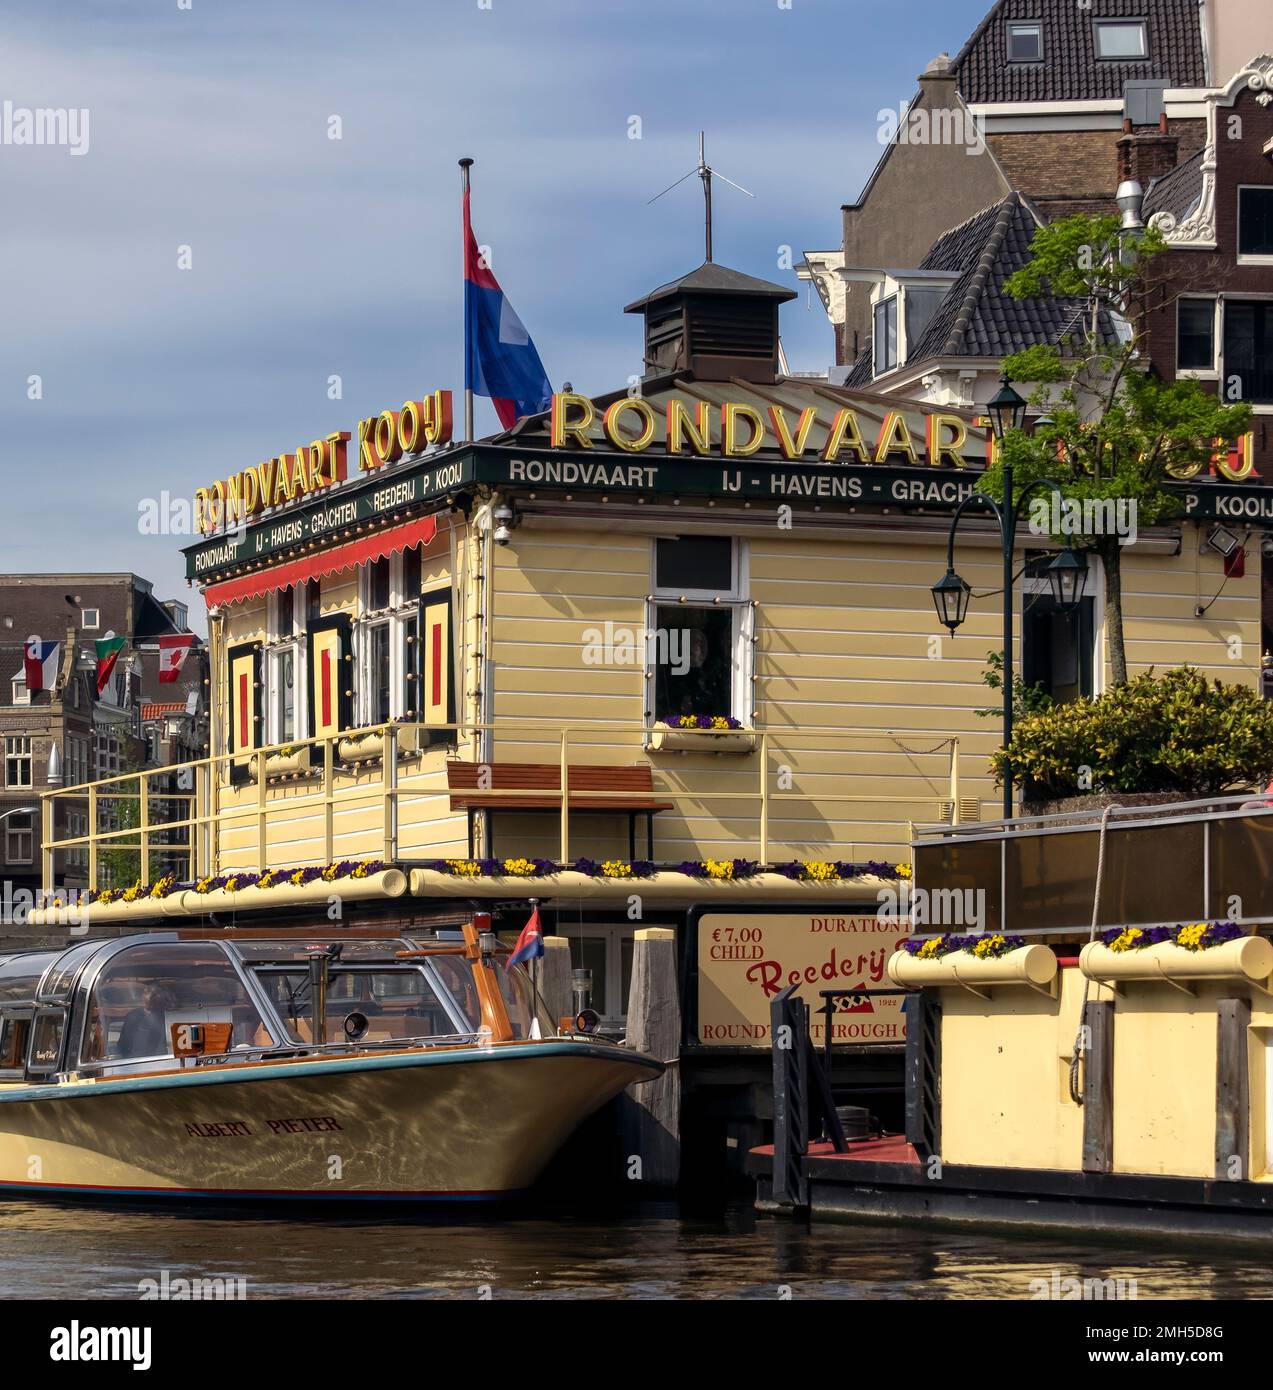 AMSTERDAM, NETHERLANDS - MAY 01, 2018:  Canal cruise round trip (Rondvaart Koou) station at Oude Turfmarkt Stock Photo